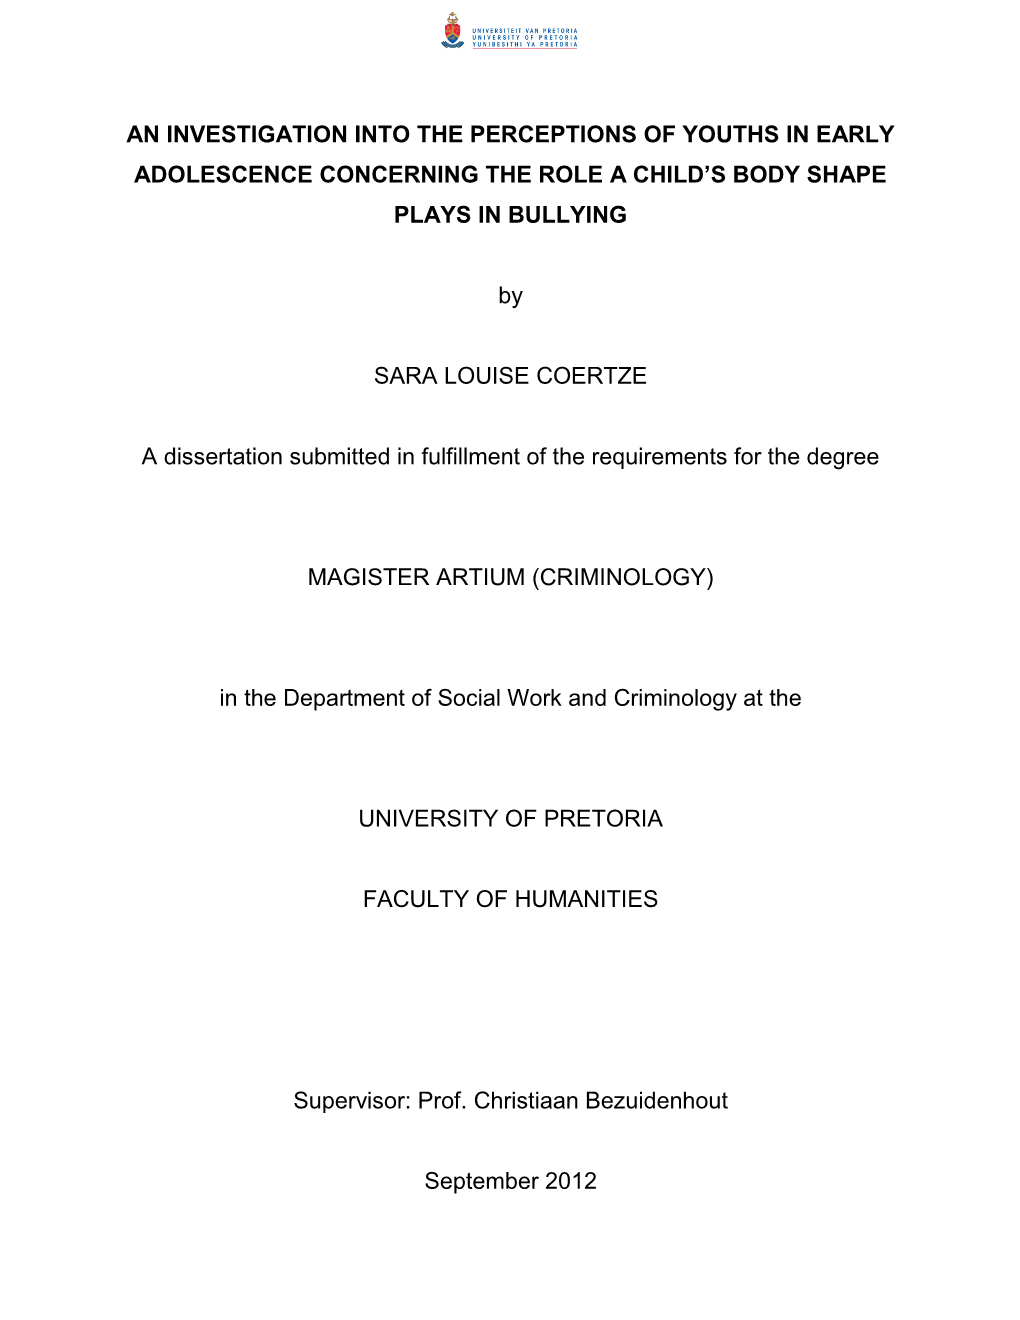 An Investigation Into the Perceptions of Youths in Early Adolescence Concerning the Role a Child’S Body Shape Plays in Bullying